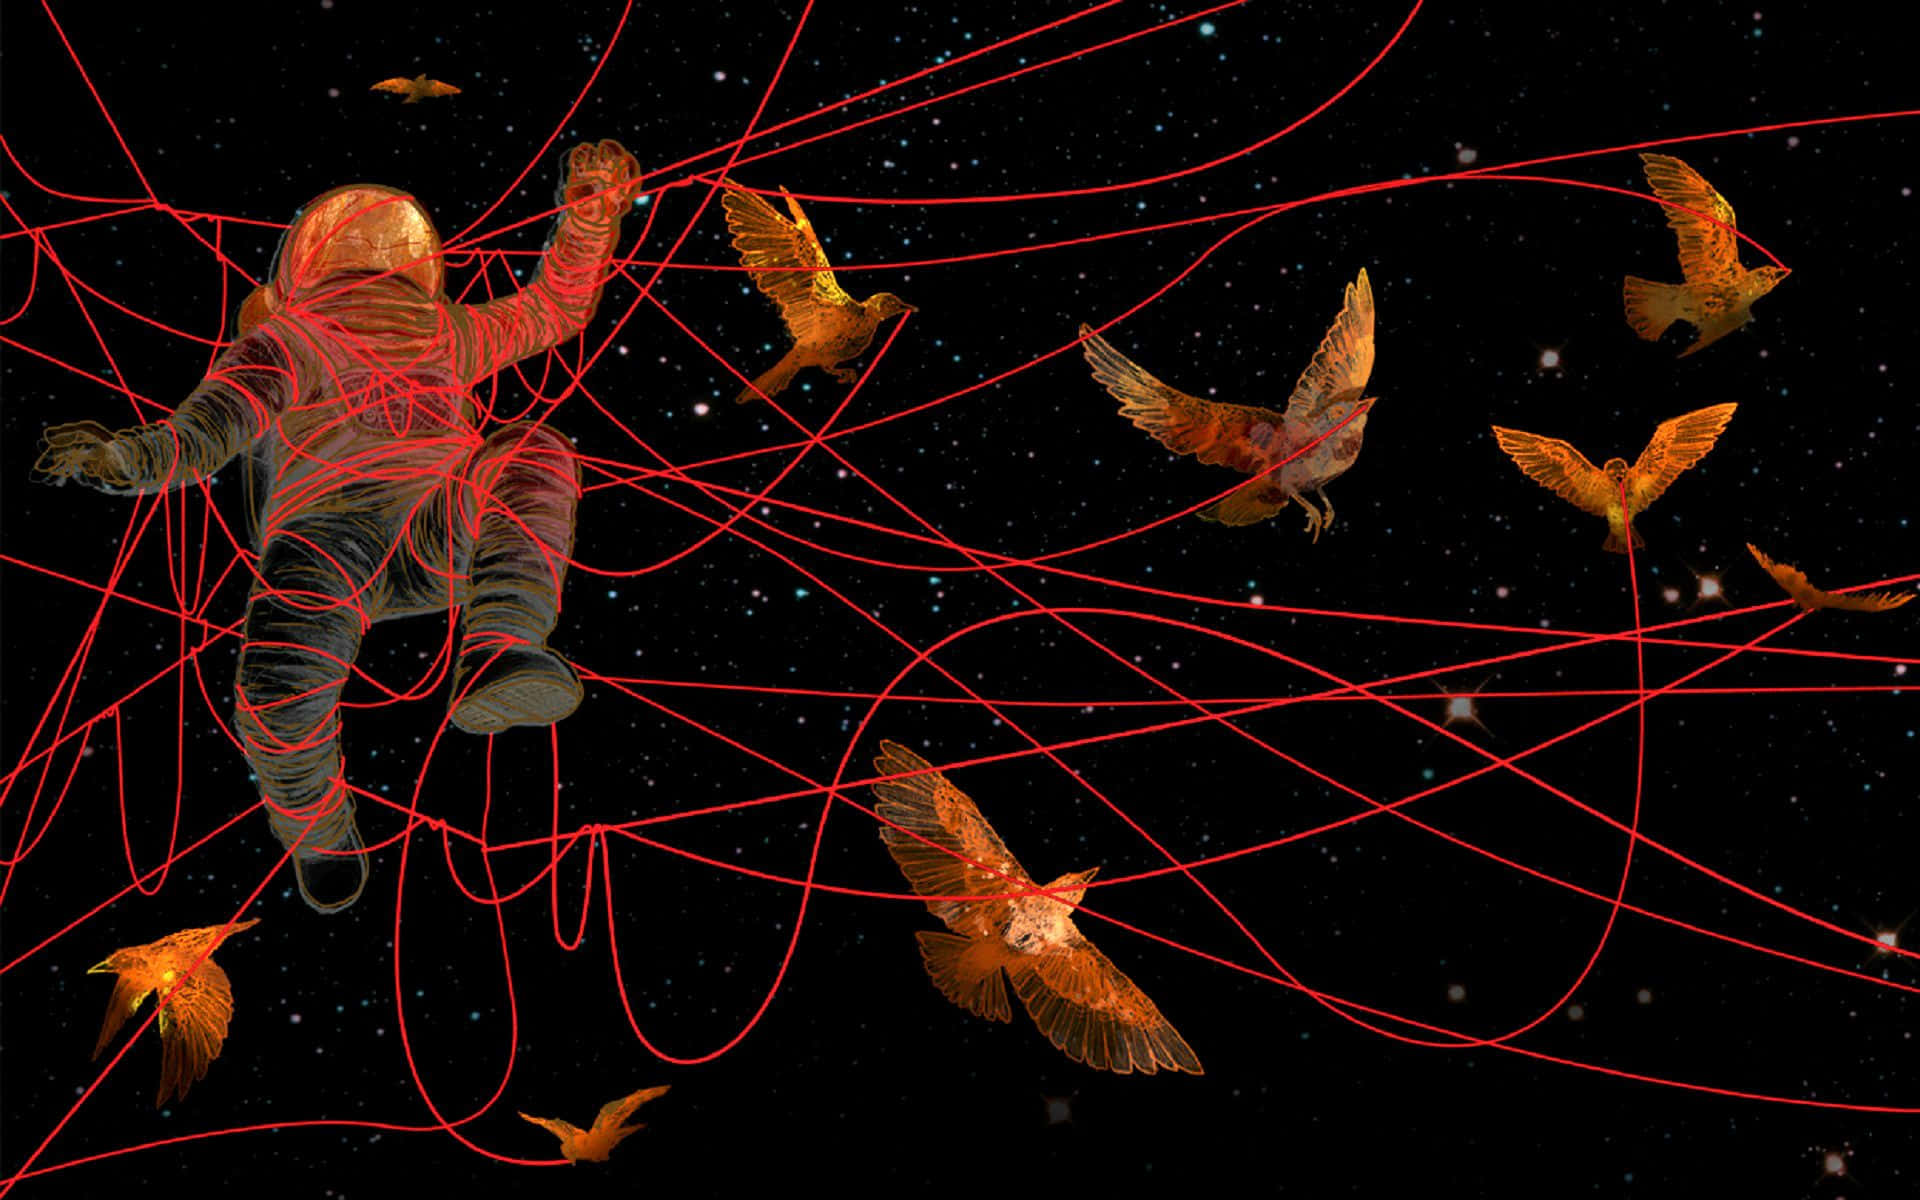 Trippy Astronaut In Space With Red Strings And Birds Wallpaper